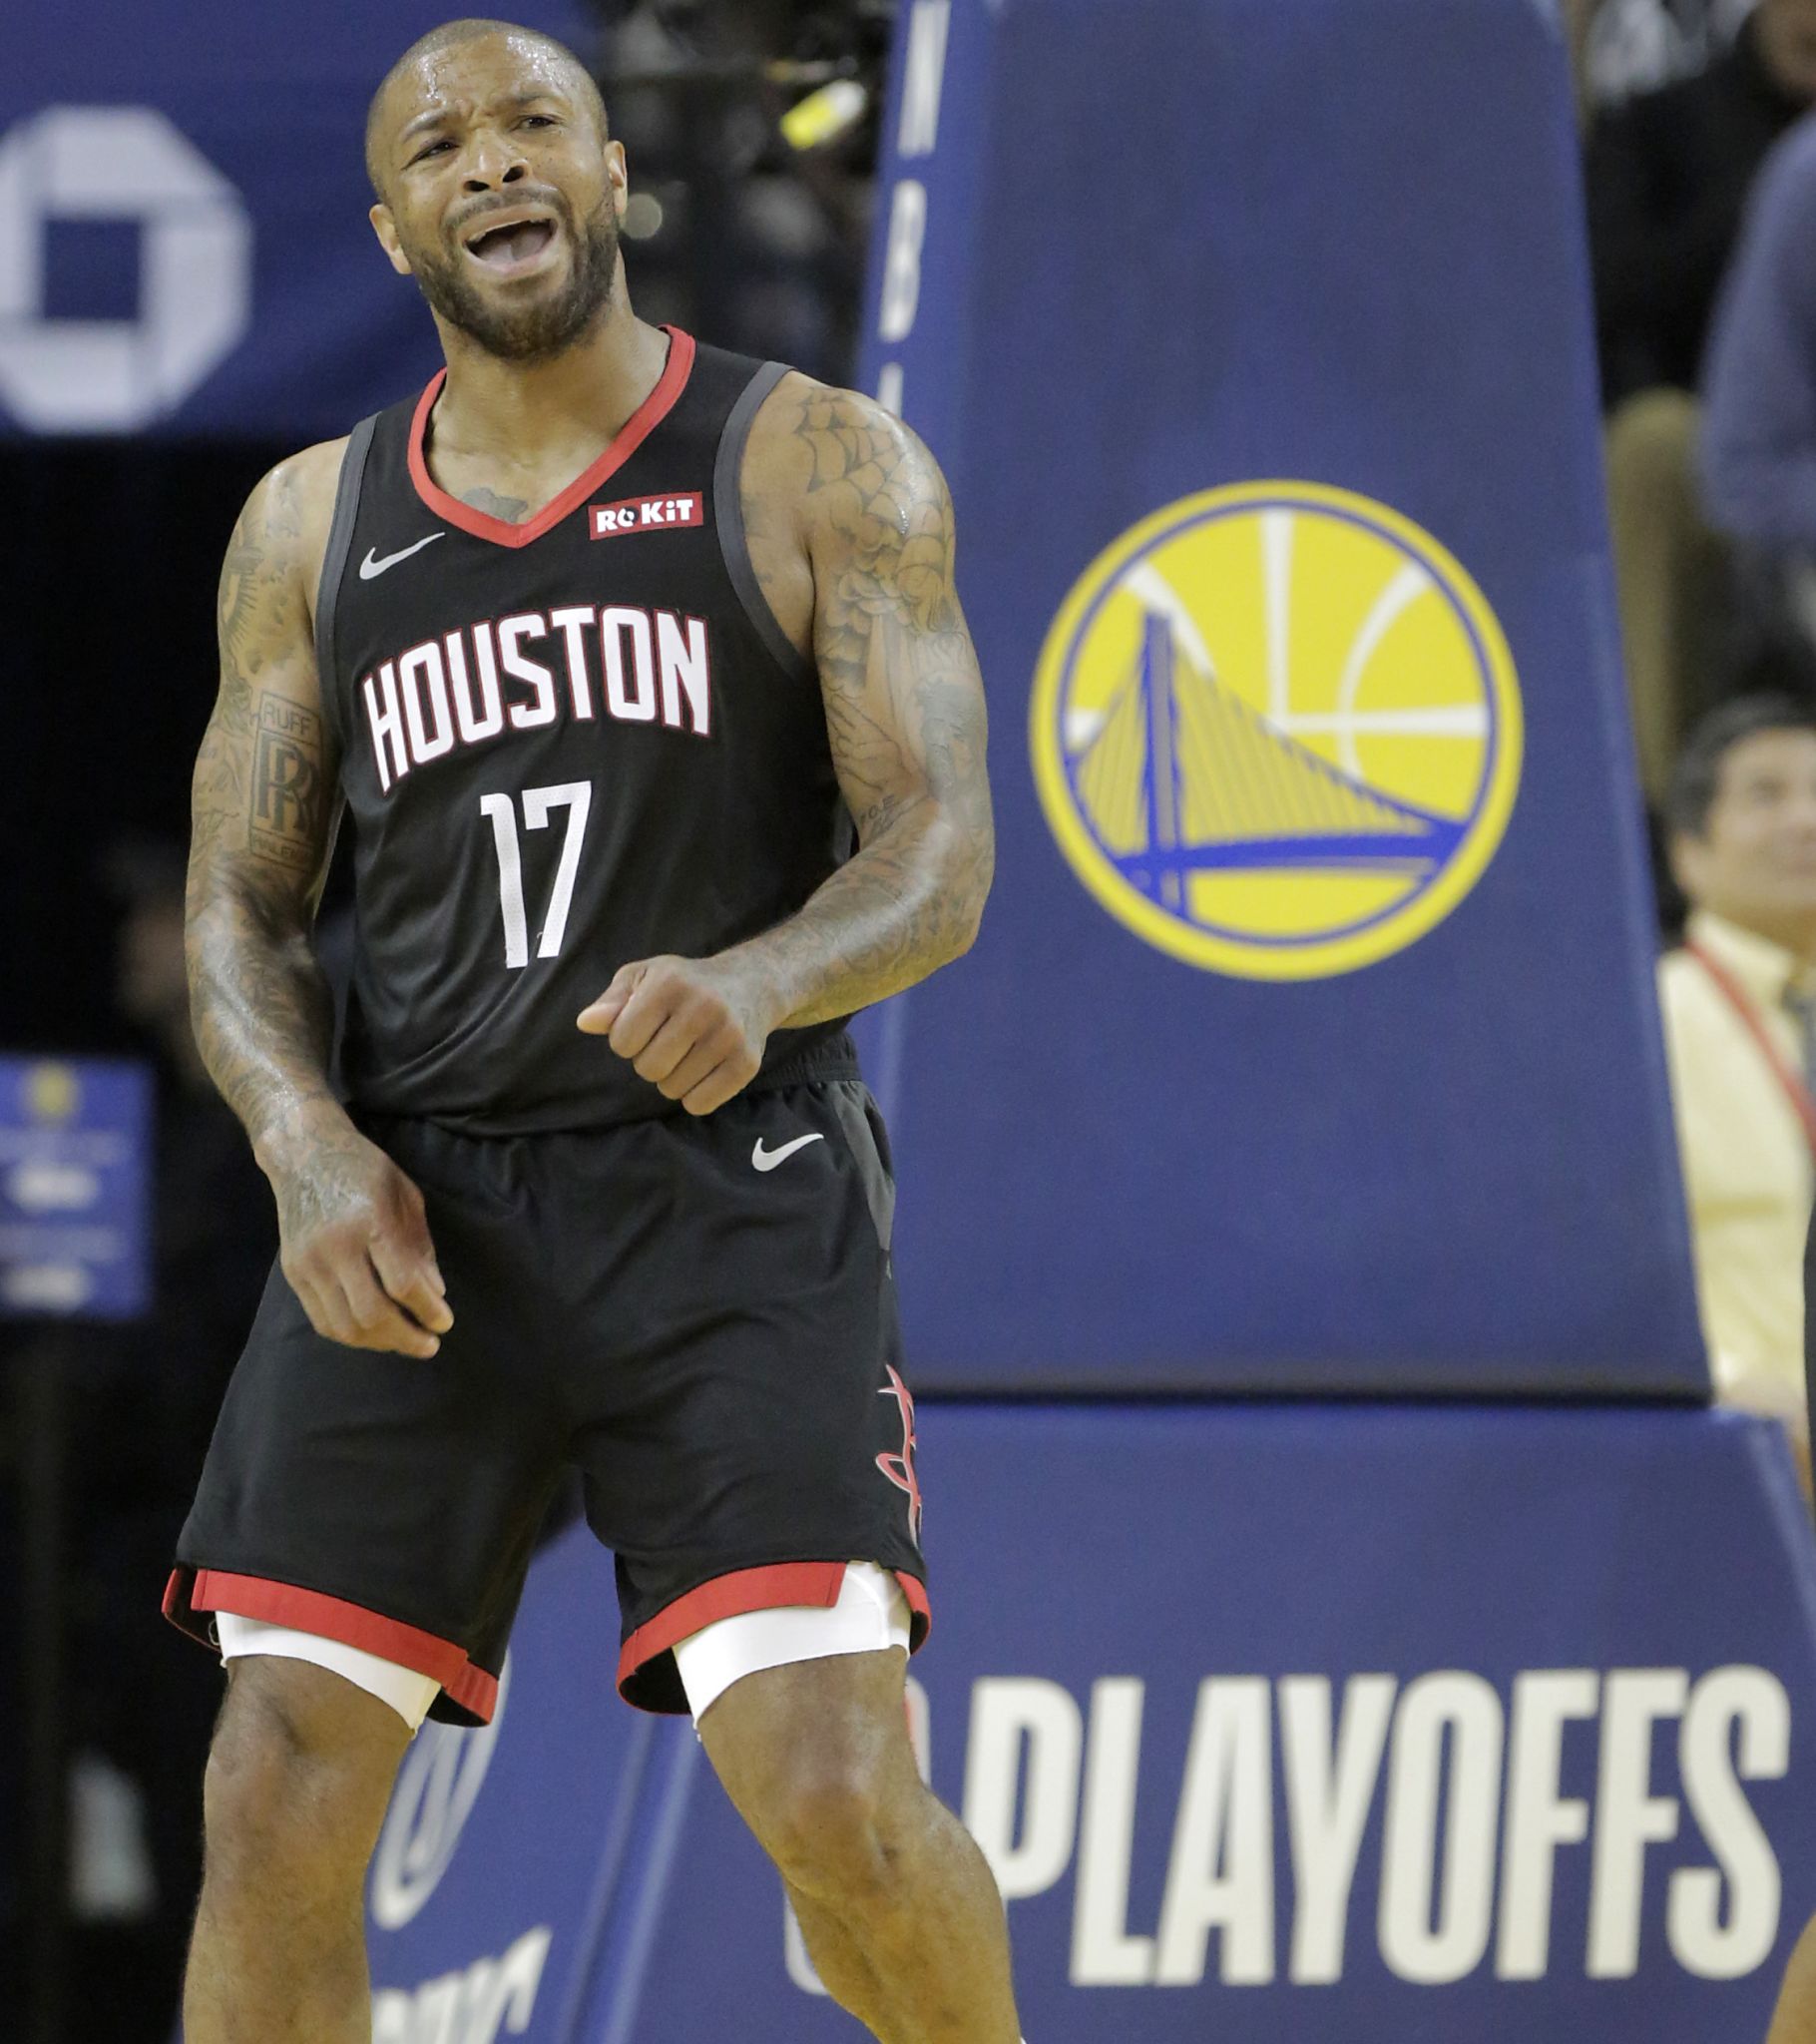 Houston Rockets: New uniforms are chic but more could've been done